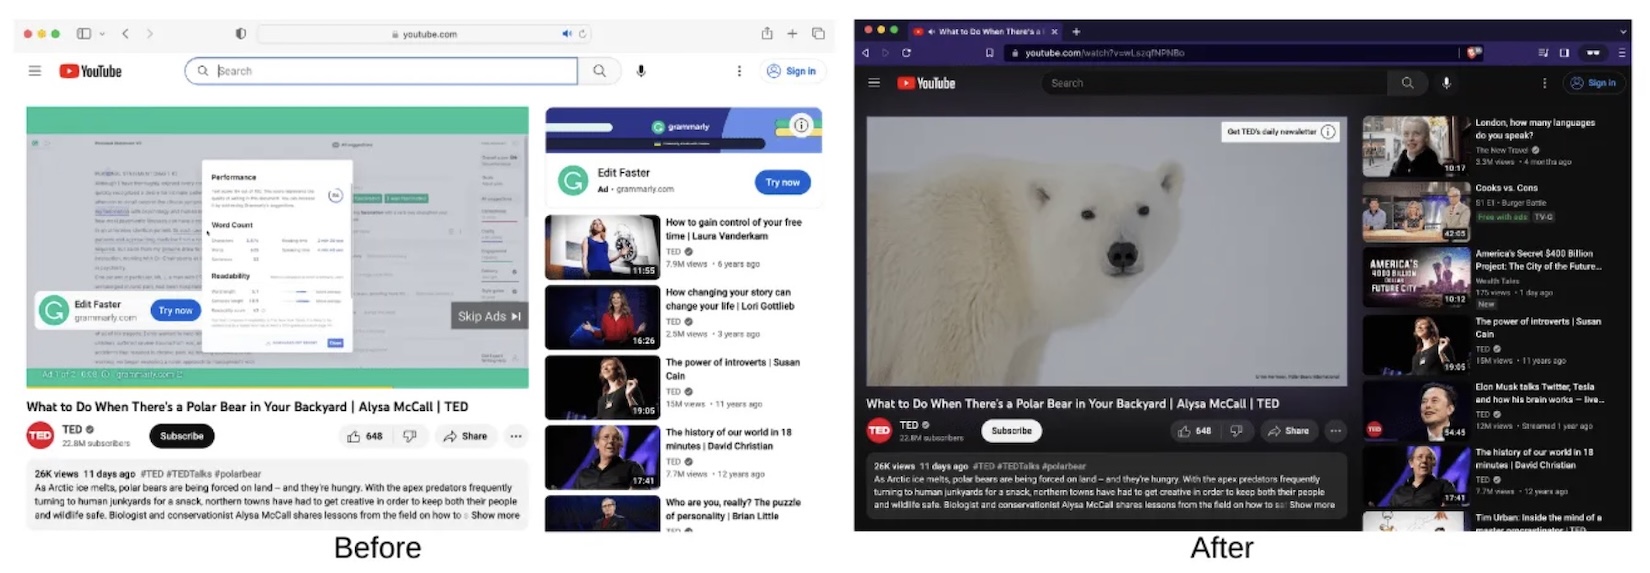 YouTube on Brave vs. another browser